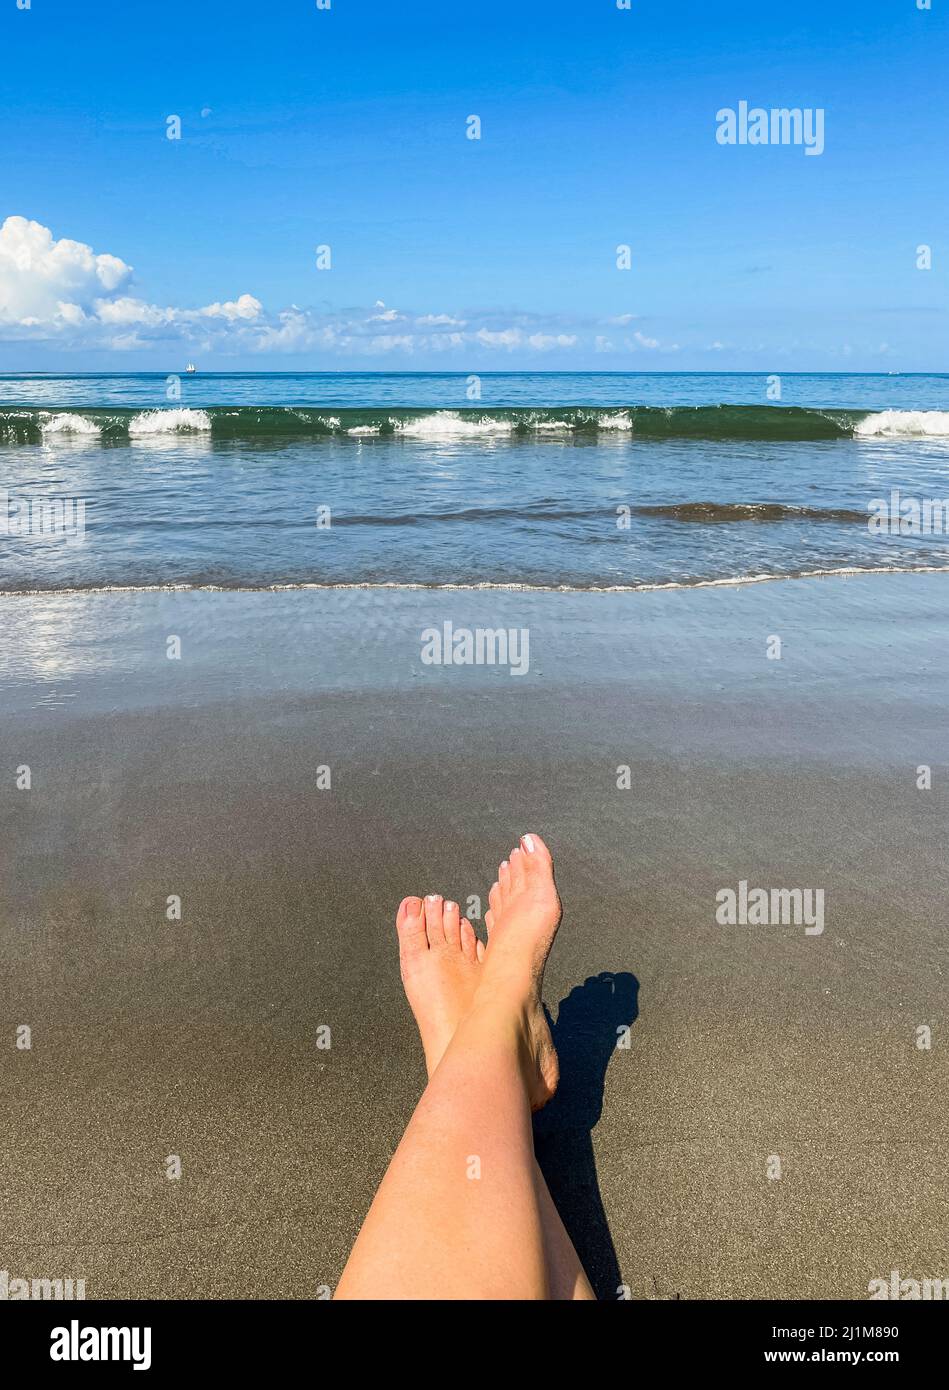 Woman's outstretched feet relaxing on the beach against the ocean. Stock Photo